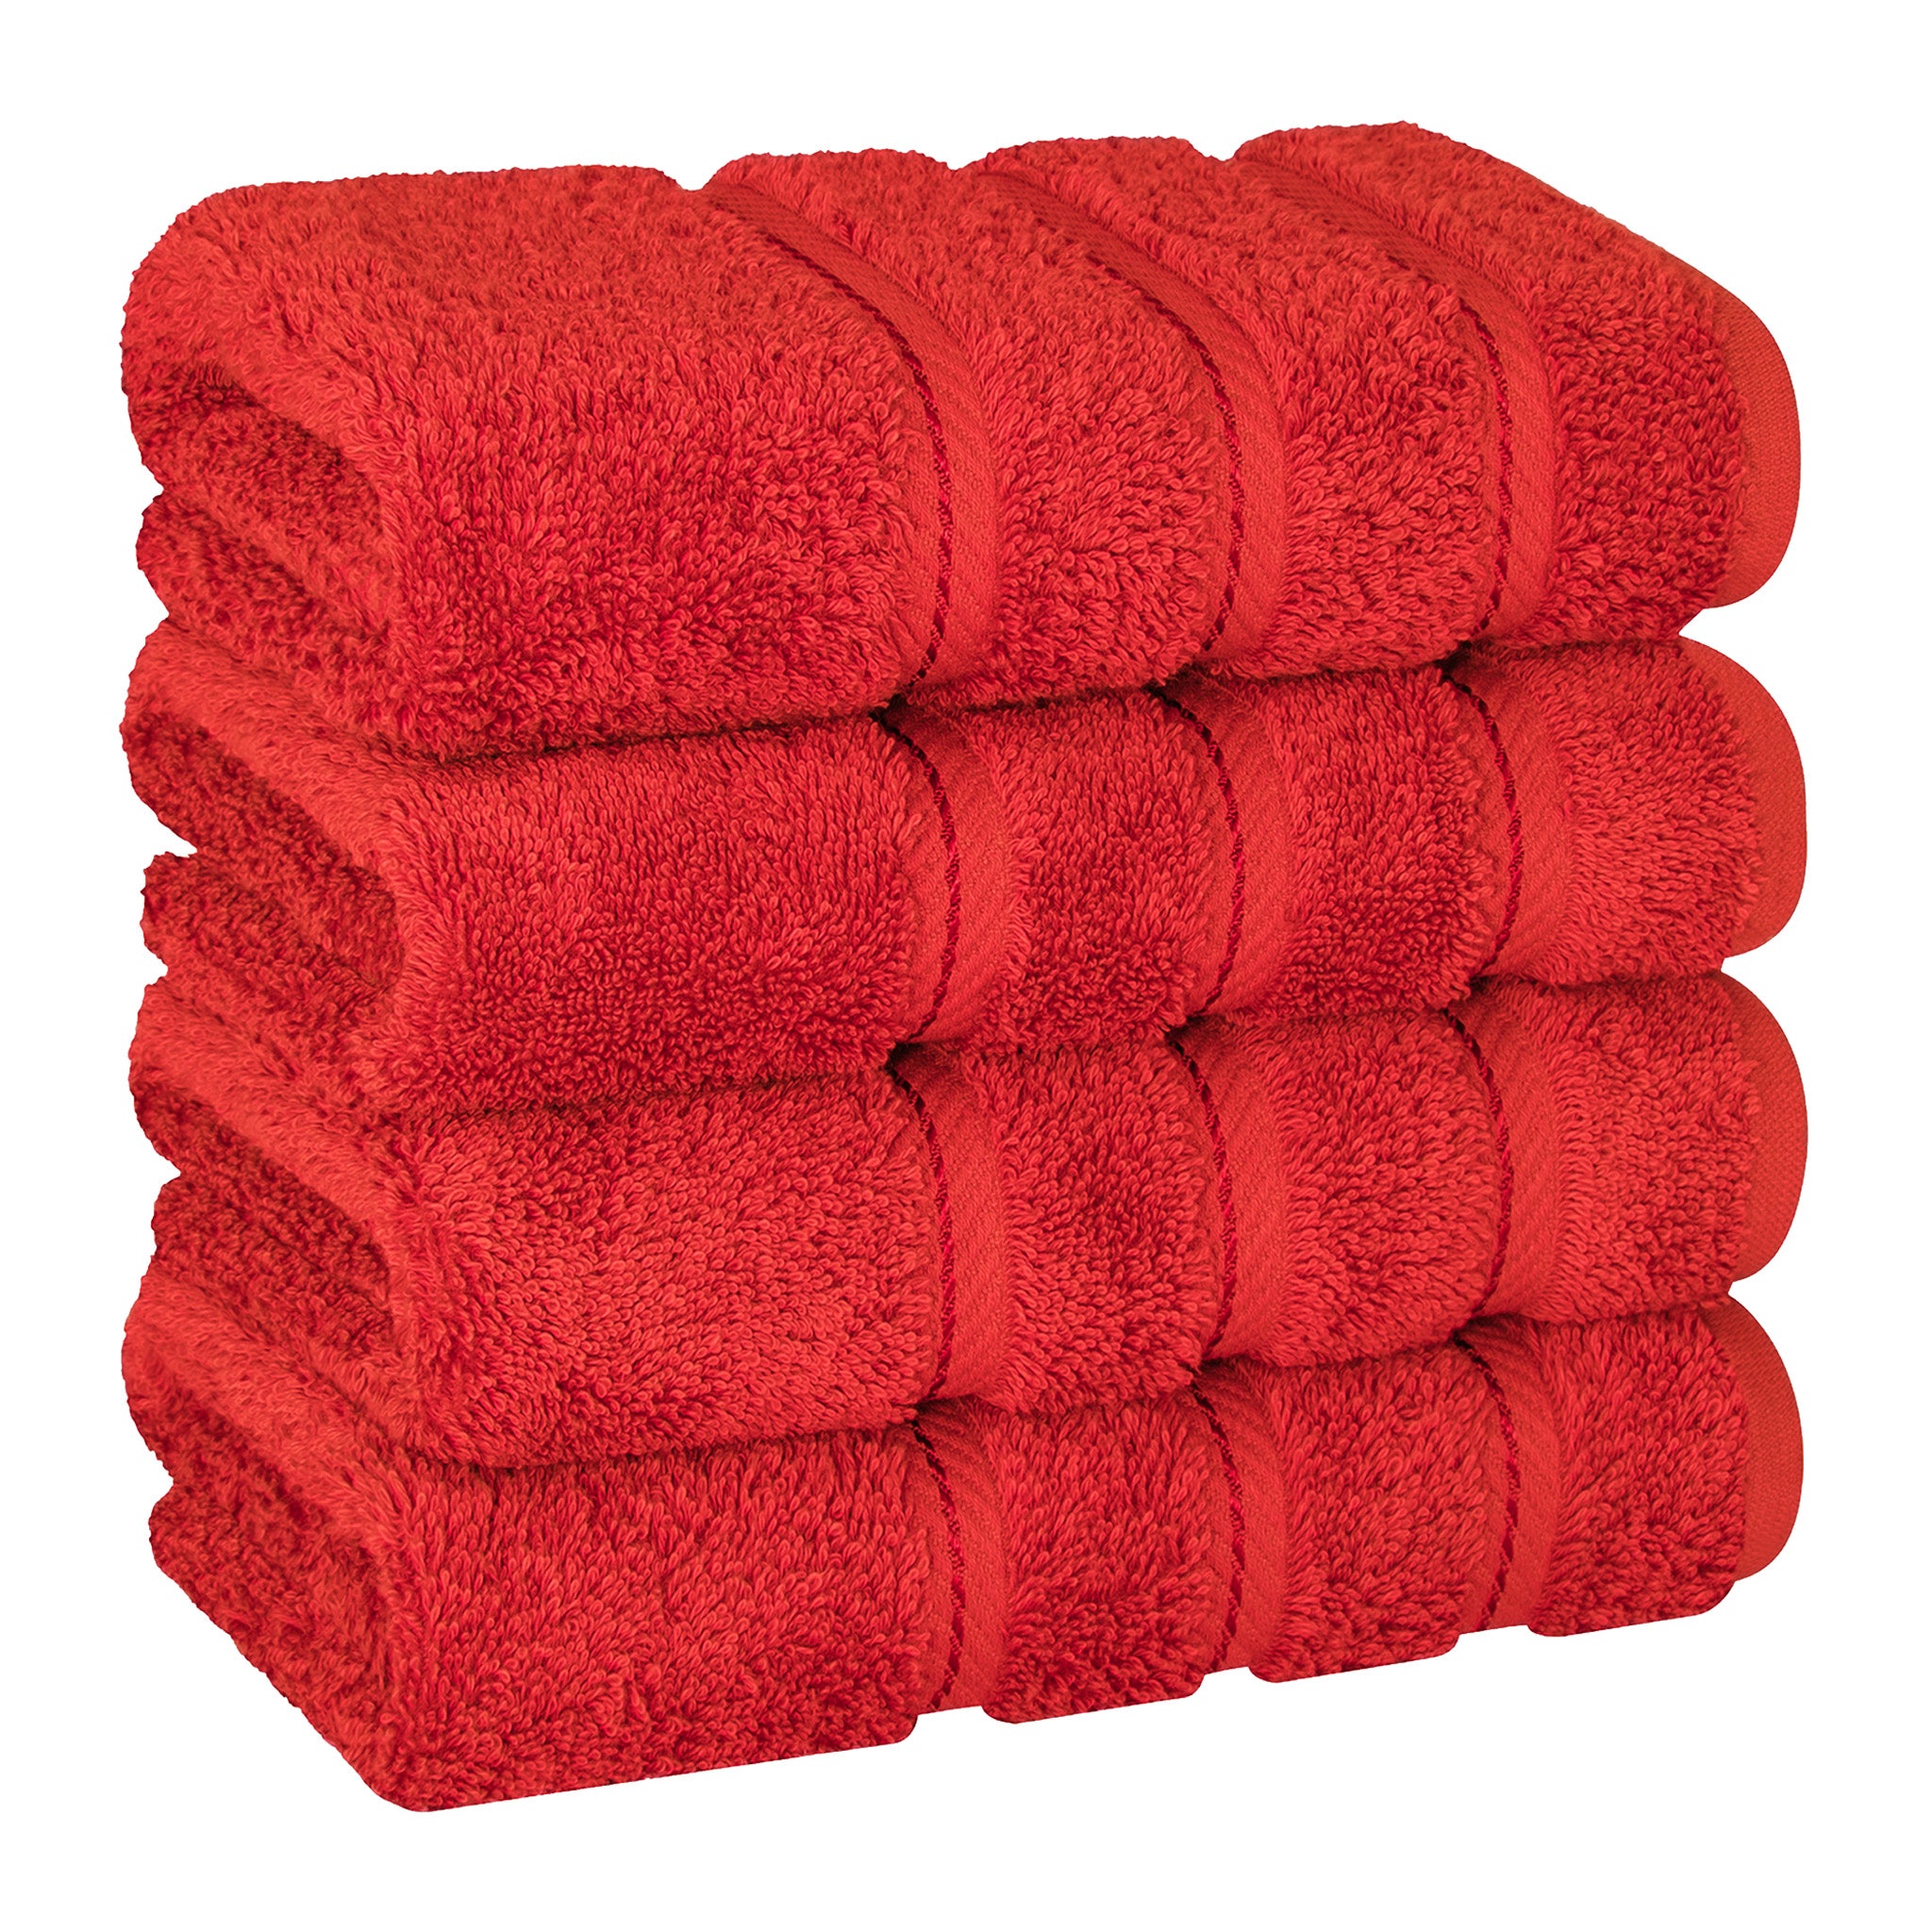 American Soft Linen 100% Turkish Cotton 4 Pack Hand Towel Set Wholesale red-1